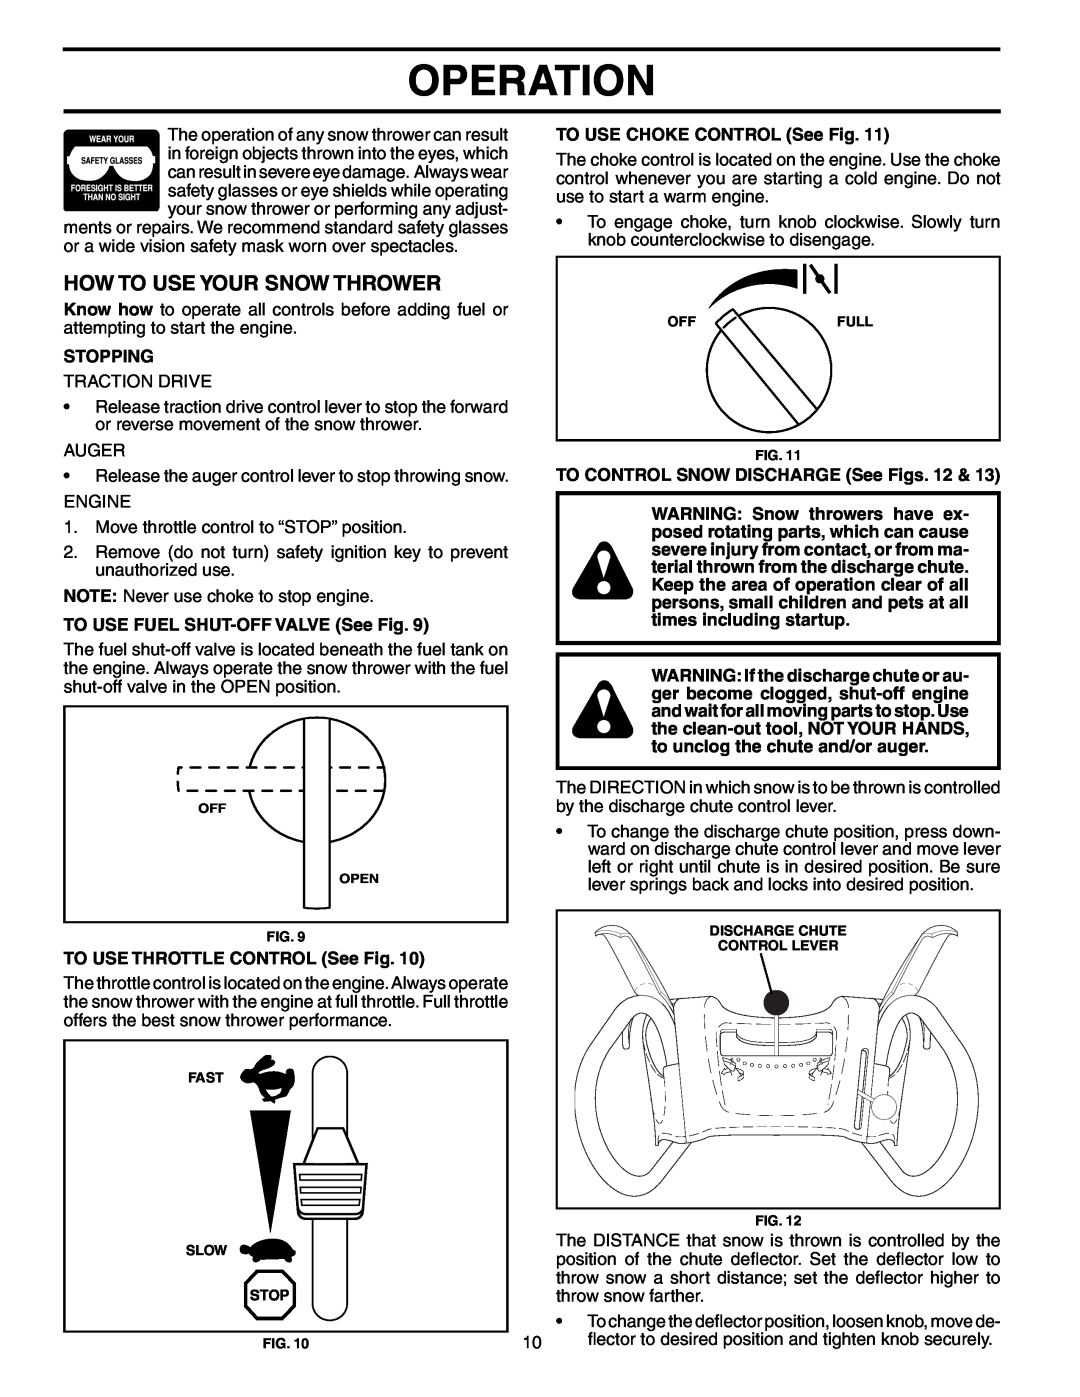 Poulan PP524B owner manual How To Use Your Snow Thrower, Operation, TO USE CHOKE CONTROL See Fig, Stopping 